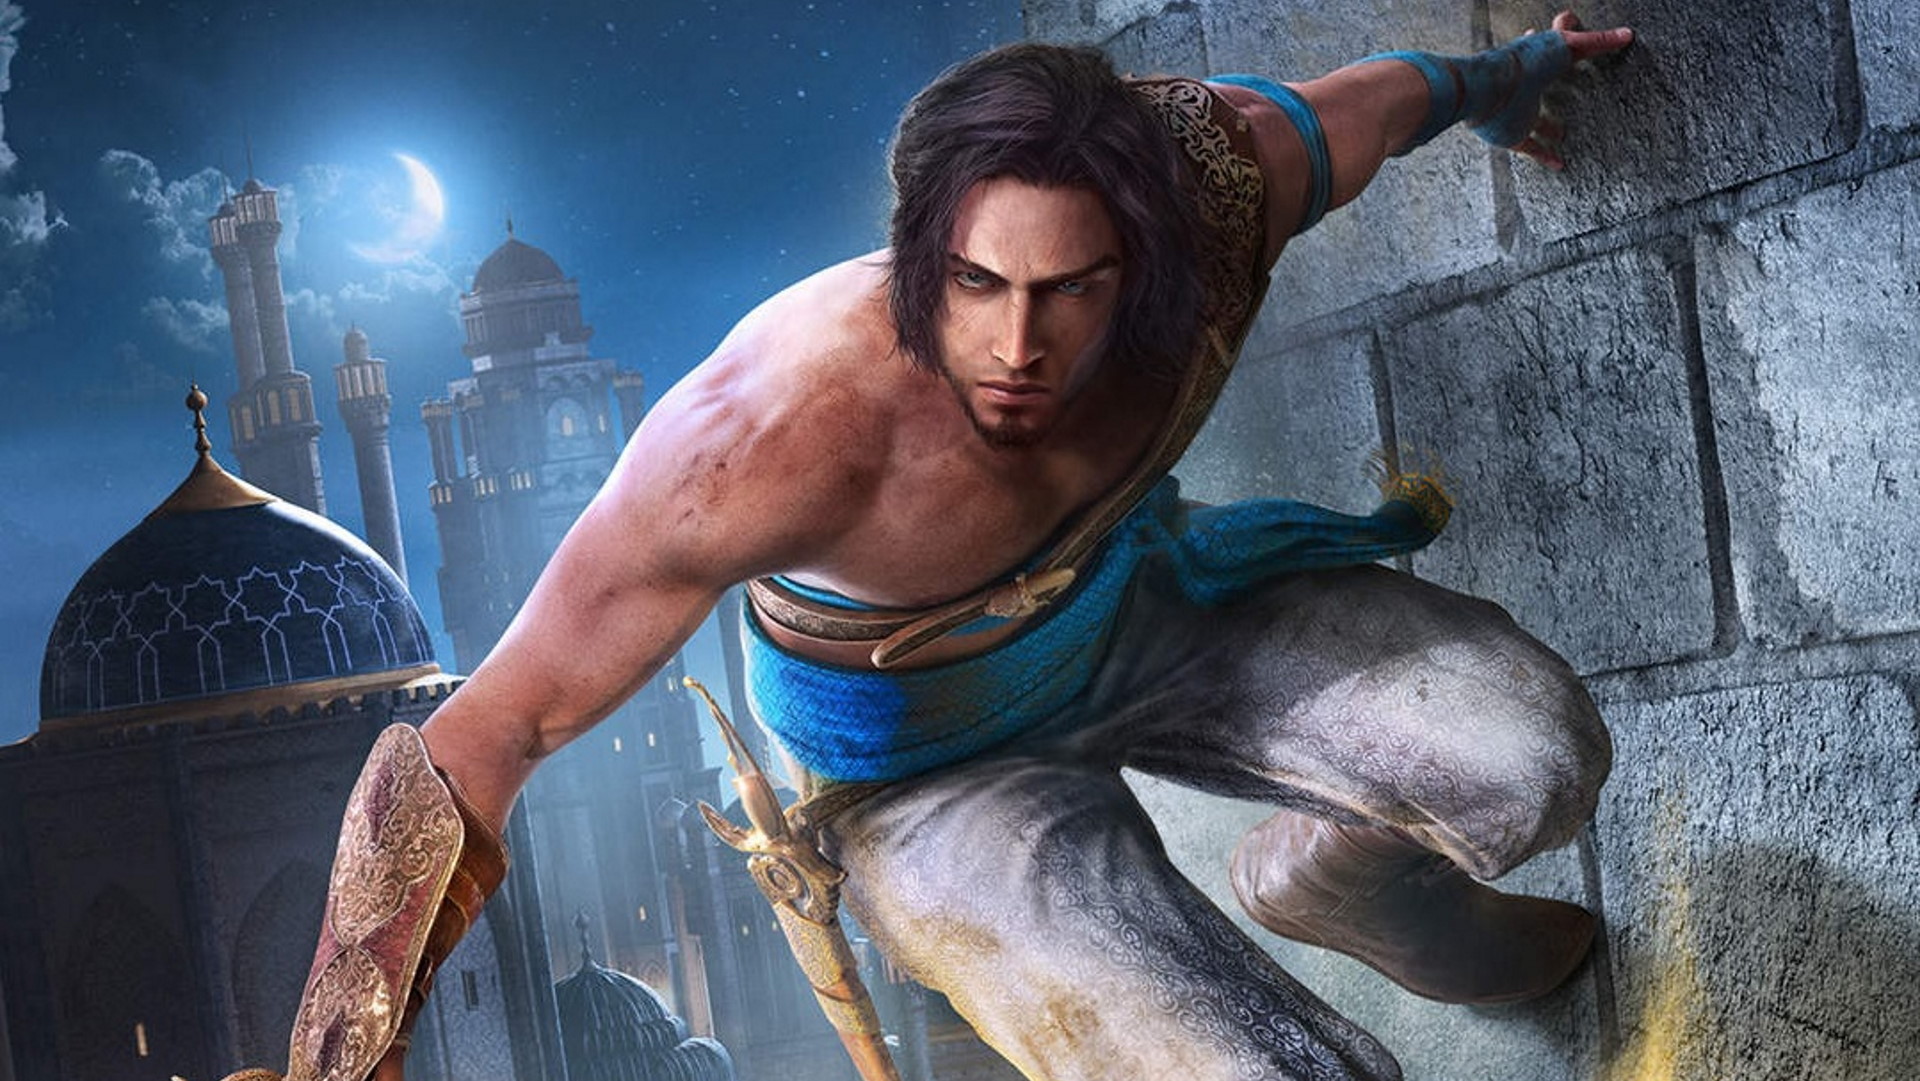 Prince of Persia: The Sands of Time Remake is aiming for 2022-23 release